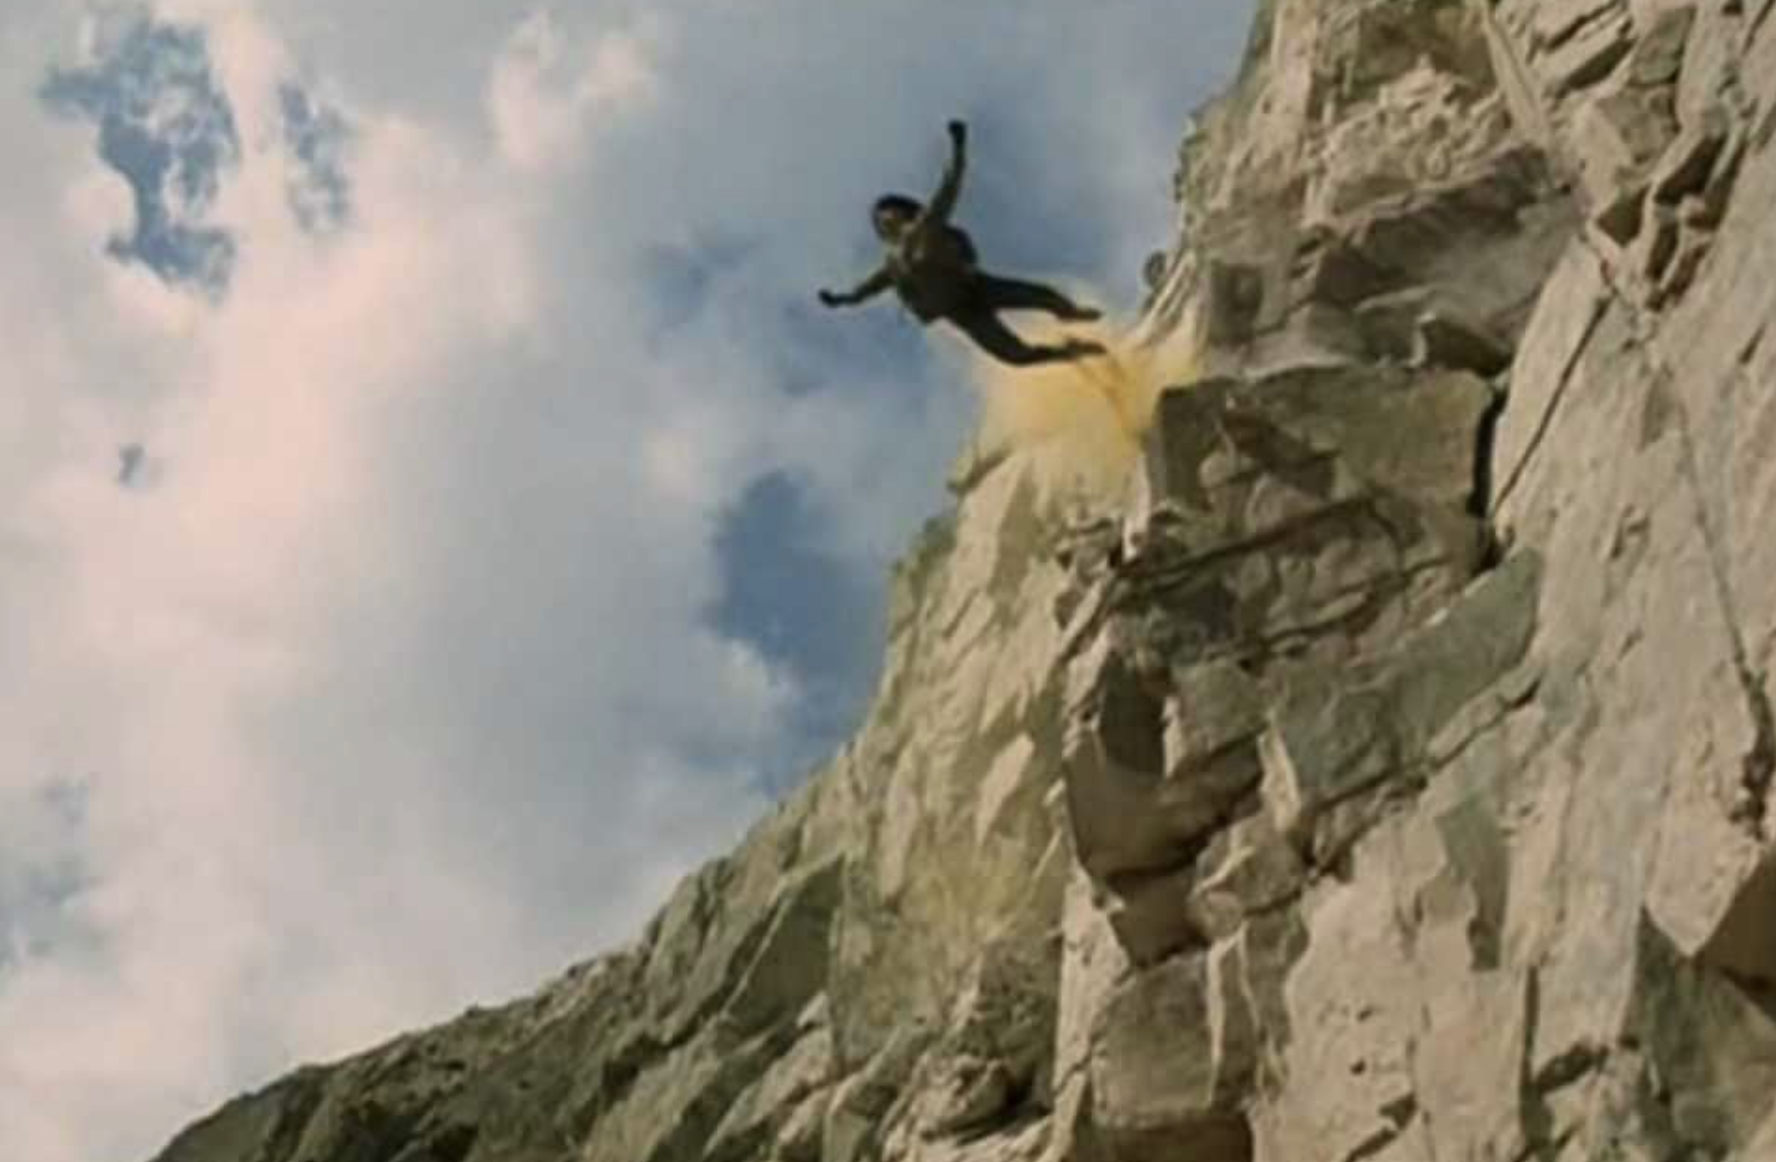 “Jackie Chan jumping off a cliff onto a hot air balloon in Armor of God. No safety precautions, just jumping off a godd—n cliff. If we count the ones where there were serious injuries, the slide down the pole in the mall in Police Story. Again, no safety precautions, just Jackie Chan jumping onto a vertical pole and sliding down five stories through live electrical cables. He fractured his spine, but still finished the scene.”